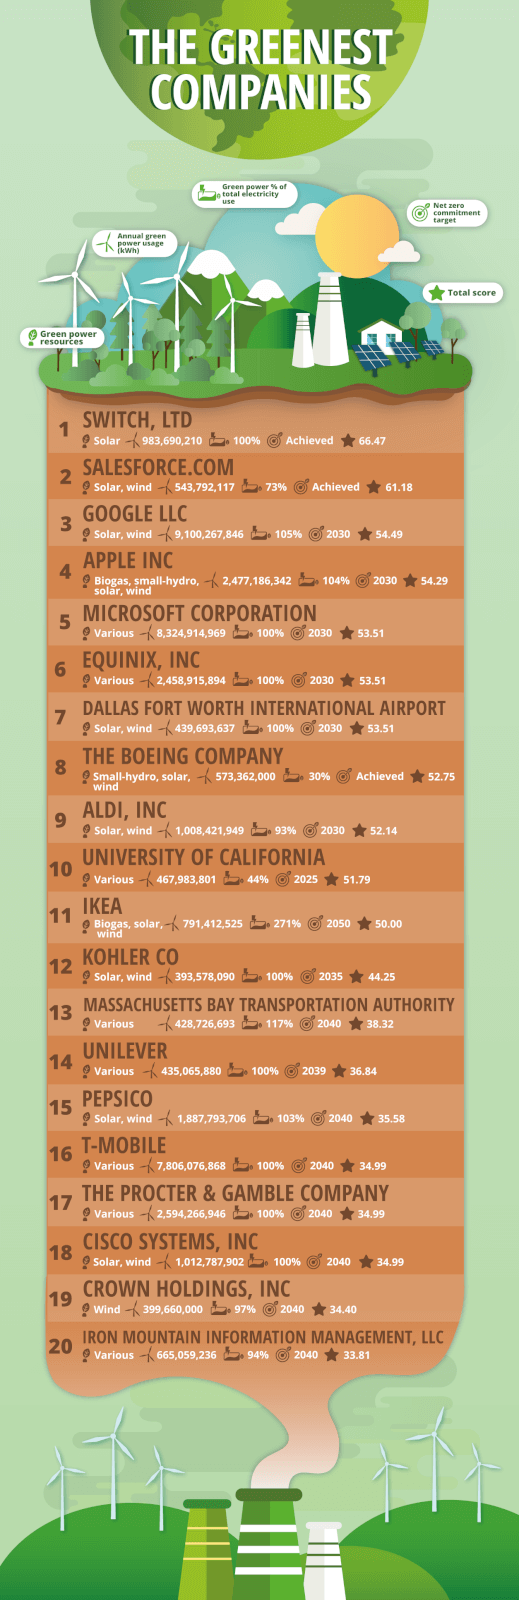 Image showing the greenest companies in America.